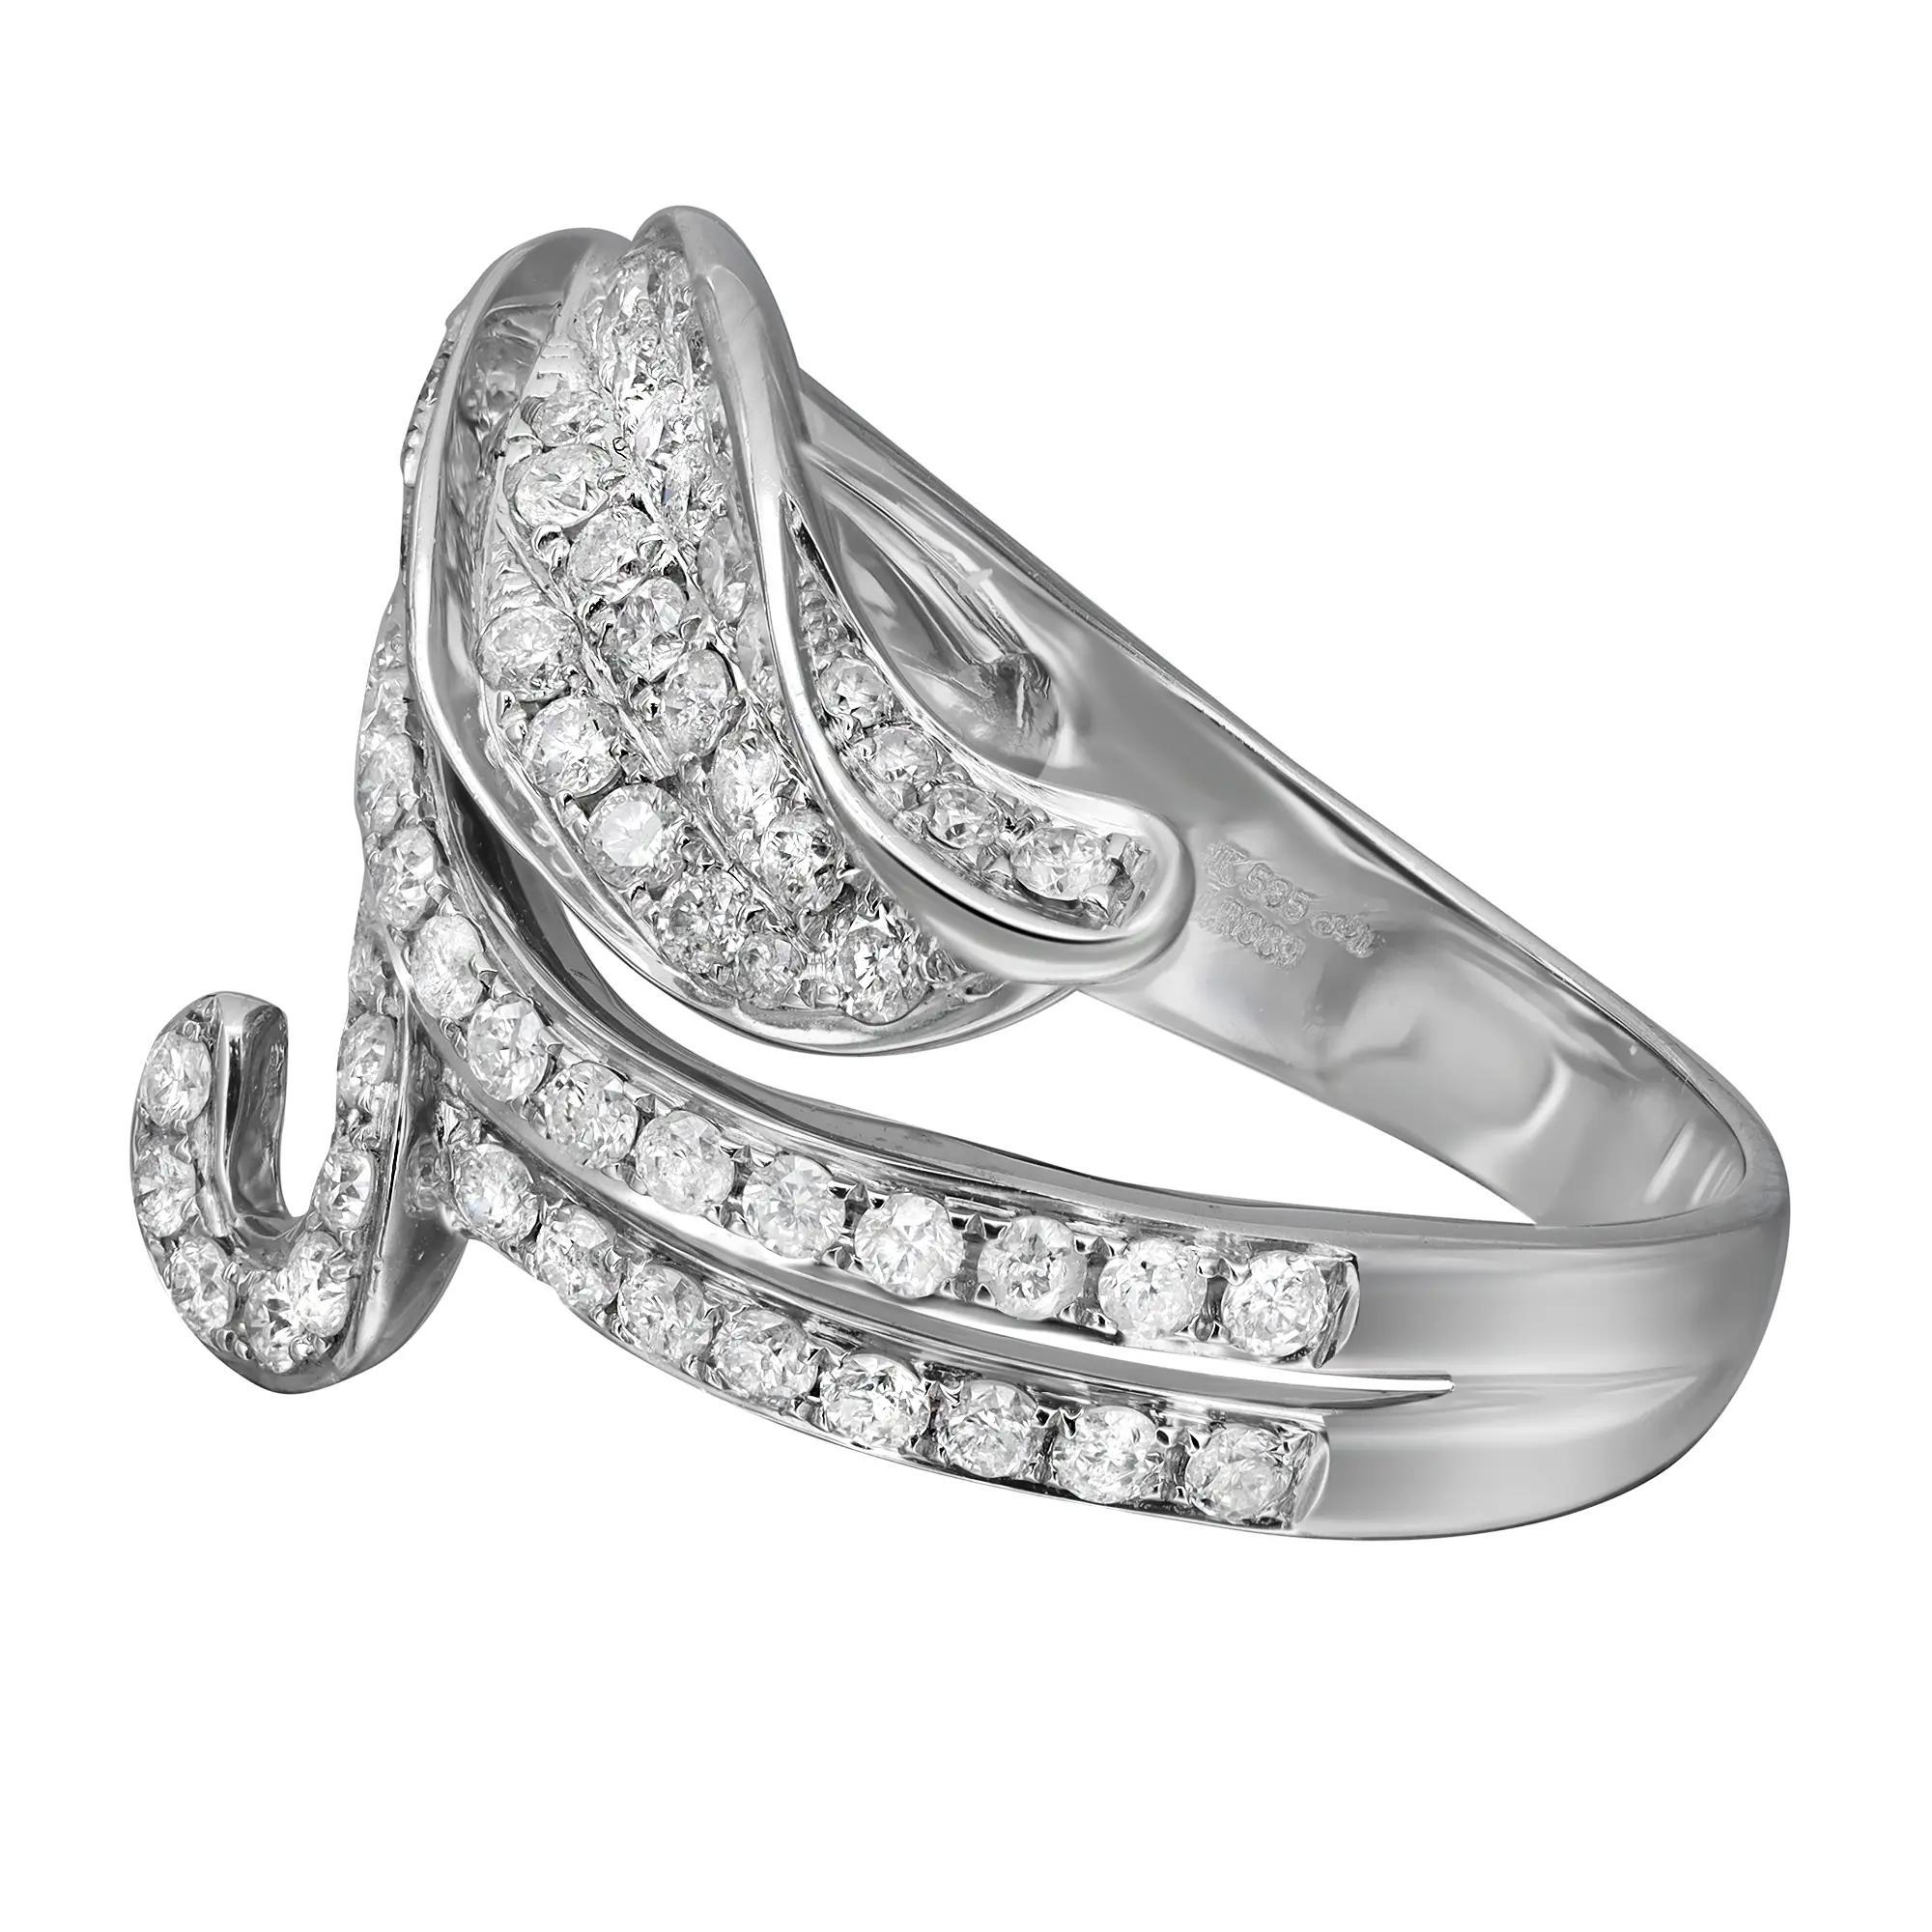 This beautiful diamond cocktail ring features shimmering round brilliant cut diamonds in prong setting with a beautiful leaf design. Total diamond weight: 1.24 carats. Diamond quality: I color and SI clarity. Crafted in 14K white gold. The ring size